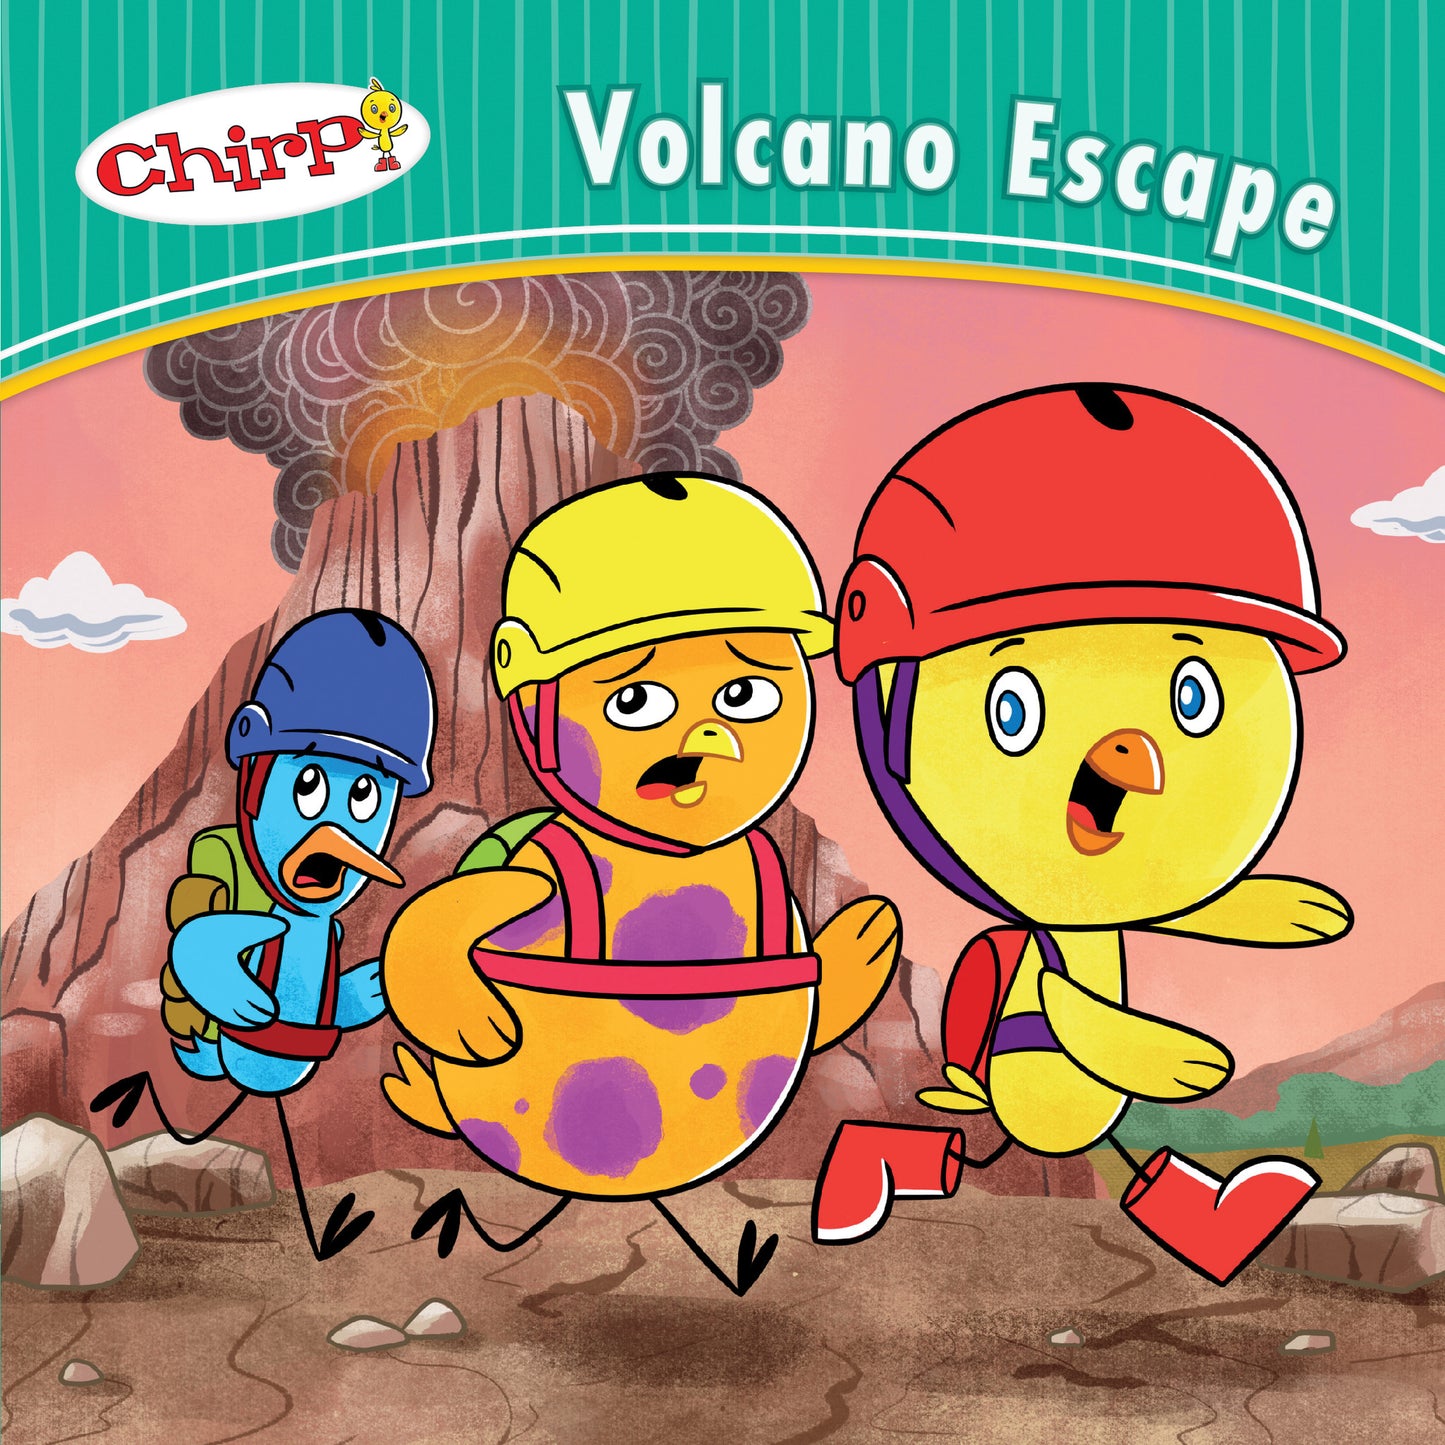 Chirp: Volcano Escape - Owlkids - Reading for kids and literacy resources for parents made fun. Books helping kids to learn.